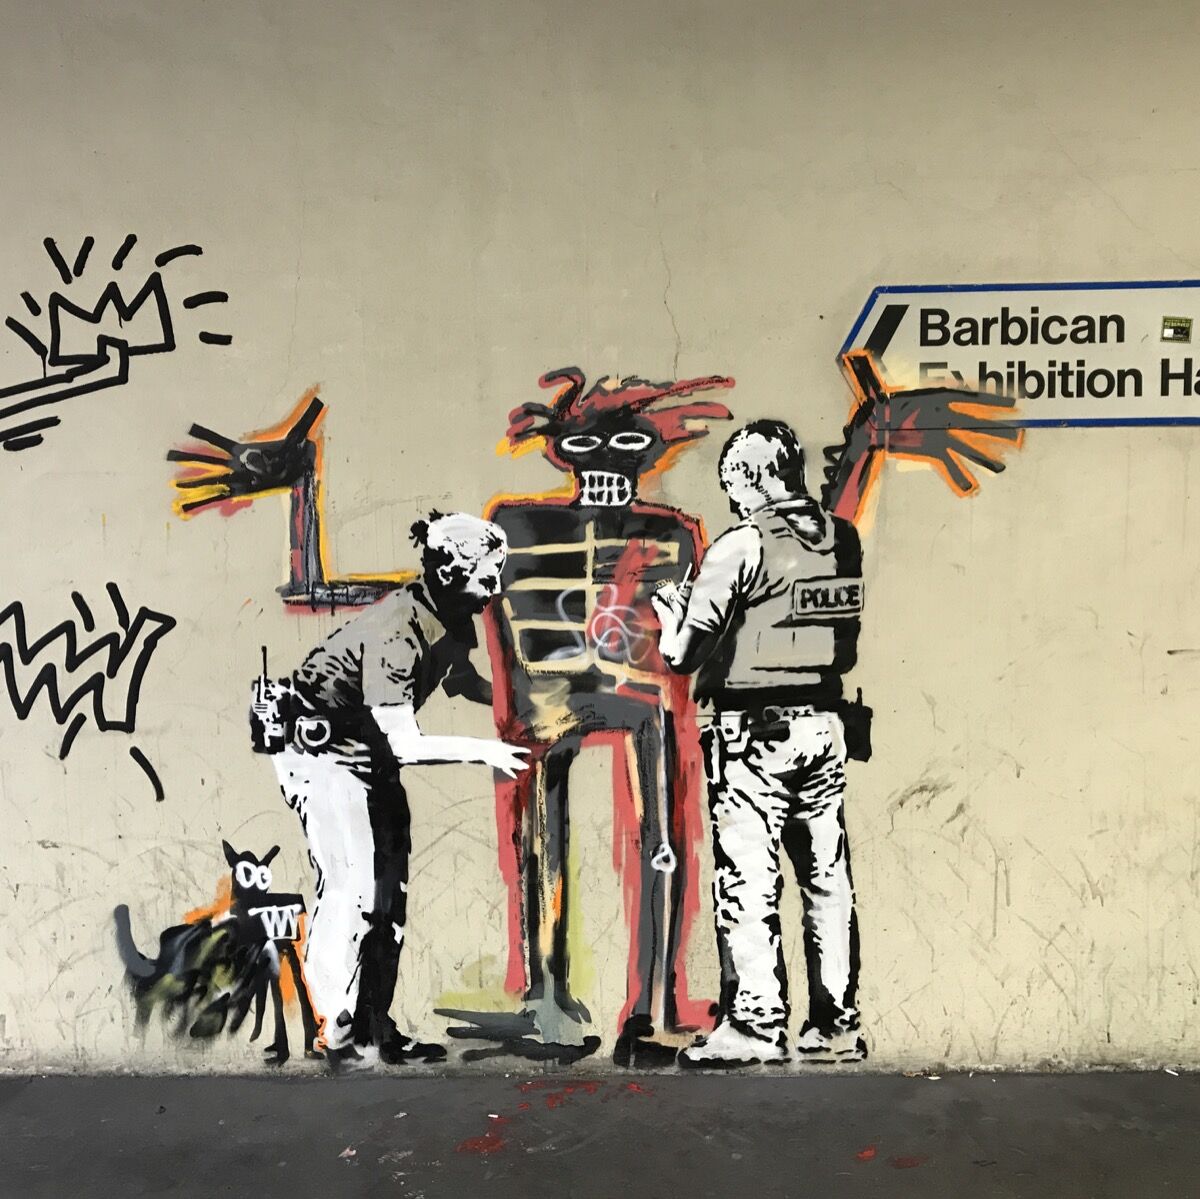 Banksy, Basquiat being “stopped-and-frisked” outside the Barbican Centre, 2017. Photo by Ungry Young Man, via Flickr.